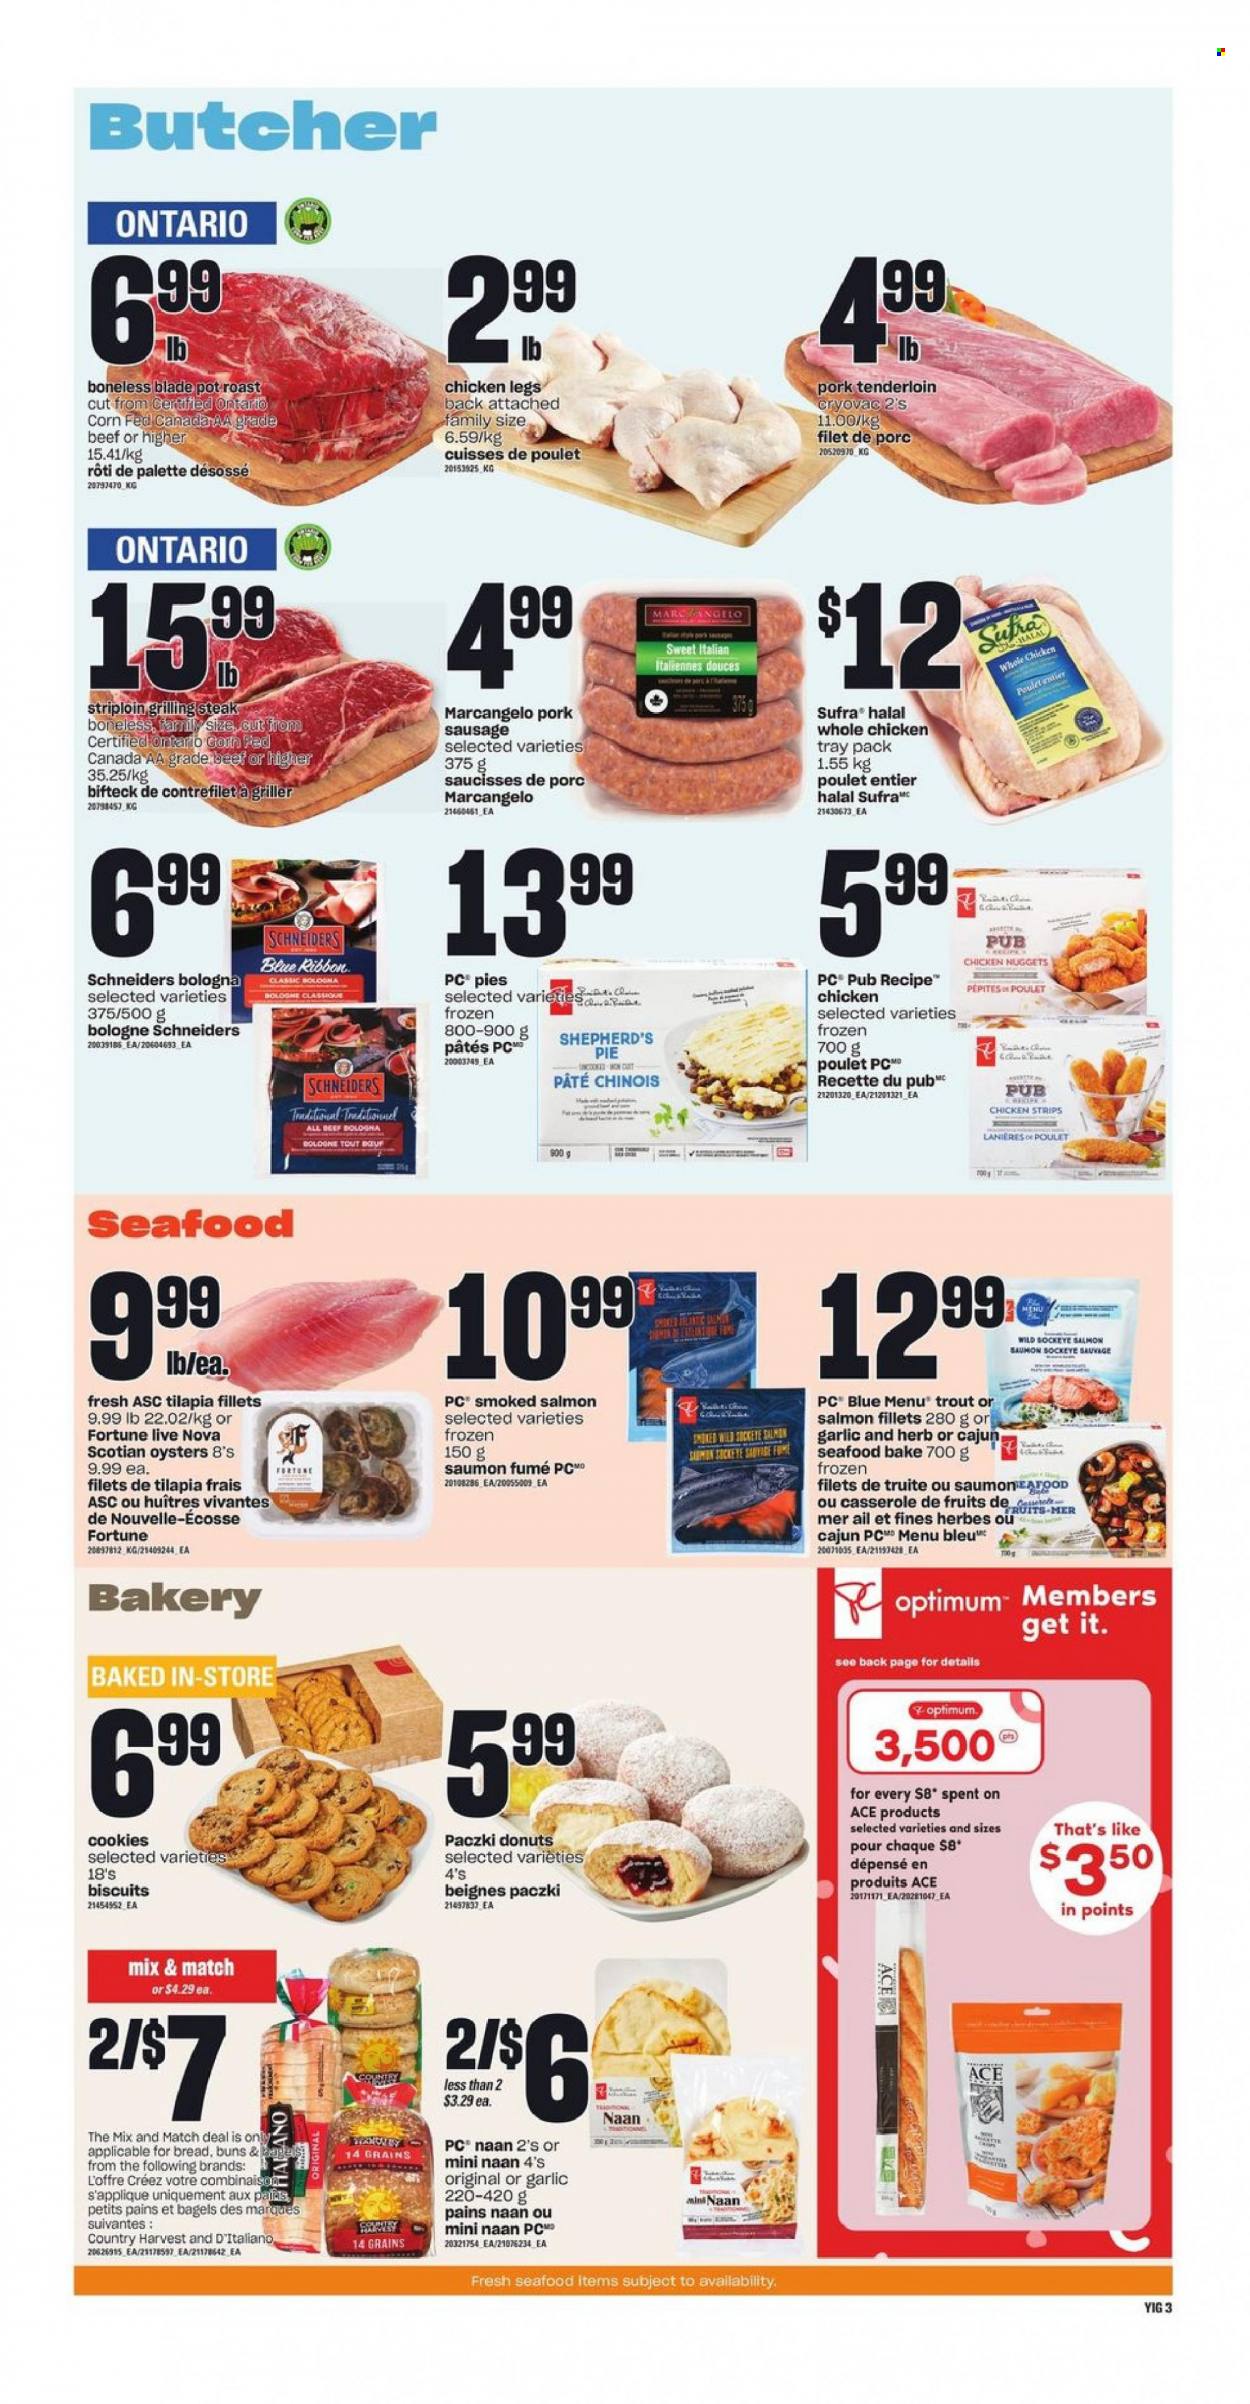 thumbnail - Independent Flyer - February 02, 2023 - February 08, 2023 - Sales products - bagels, pie, Blue Ribbon, buns, Ace, donut, paczki, garlic, salmon fillet, smoked salmon, tilapia, trout, oysters, seafood, nuggets, chicken nuggets, bologna sausage, sausage, pork sausage, Country Harvest, strips, chicken strips, cookies, biscuit, herbs, whole chicken, chicken legs, chicken, pork meat, pork tenderloin, Palette, pot, casserole, Optimum, steak. Page 5.